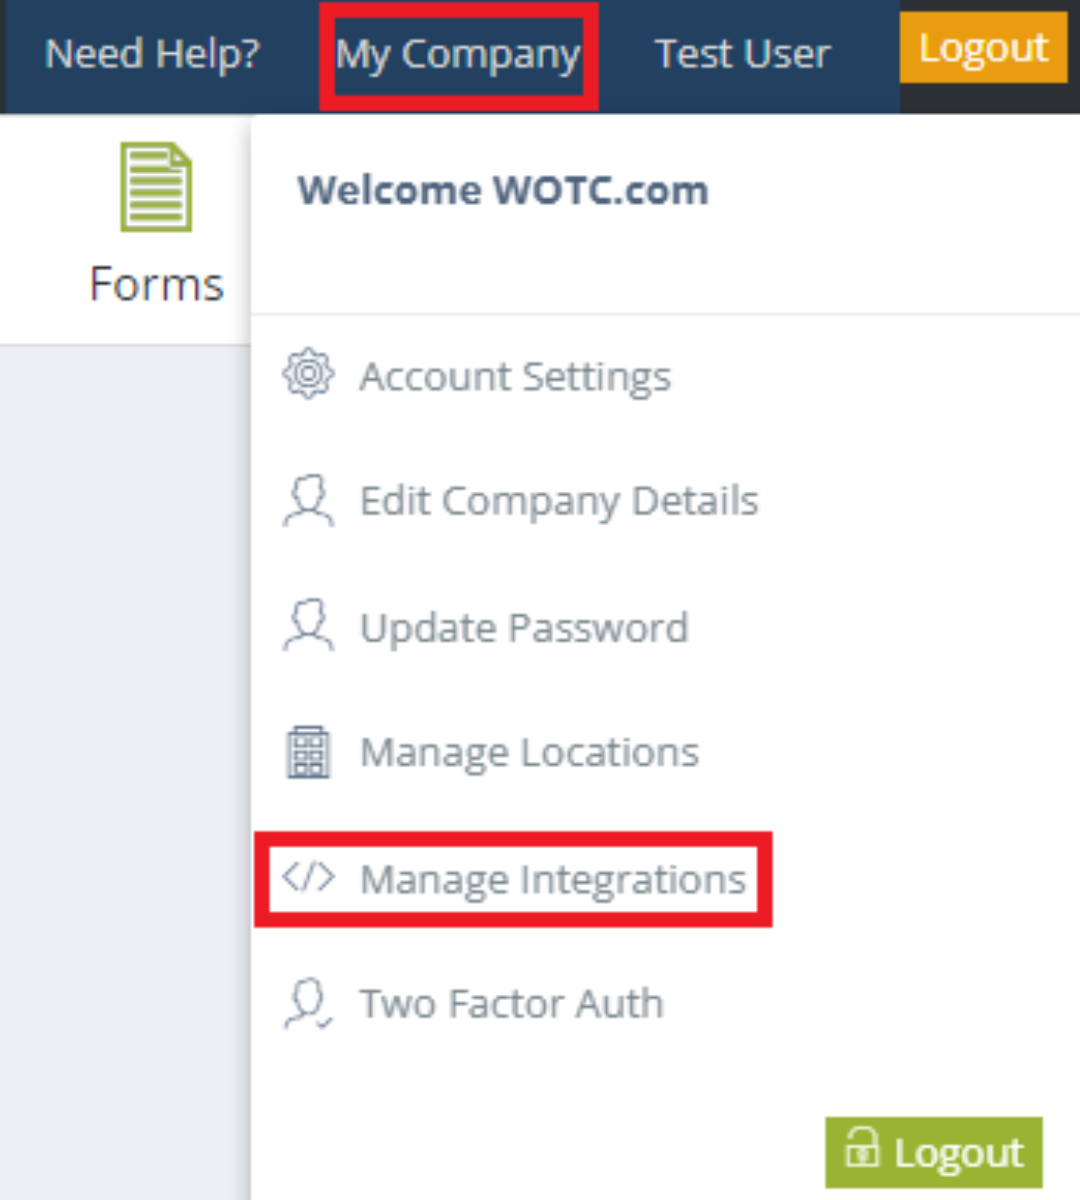 Menu extending from My Company in nav bar, Manage Integrations option outlined